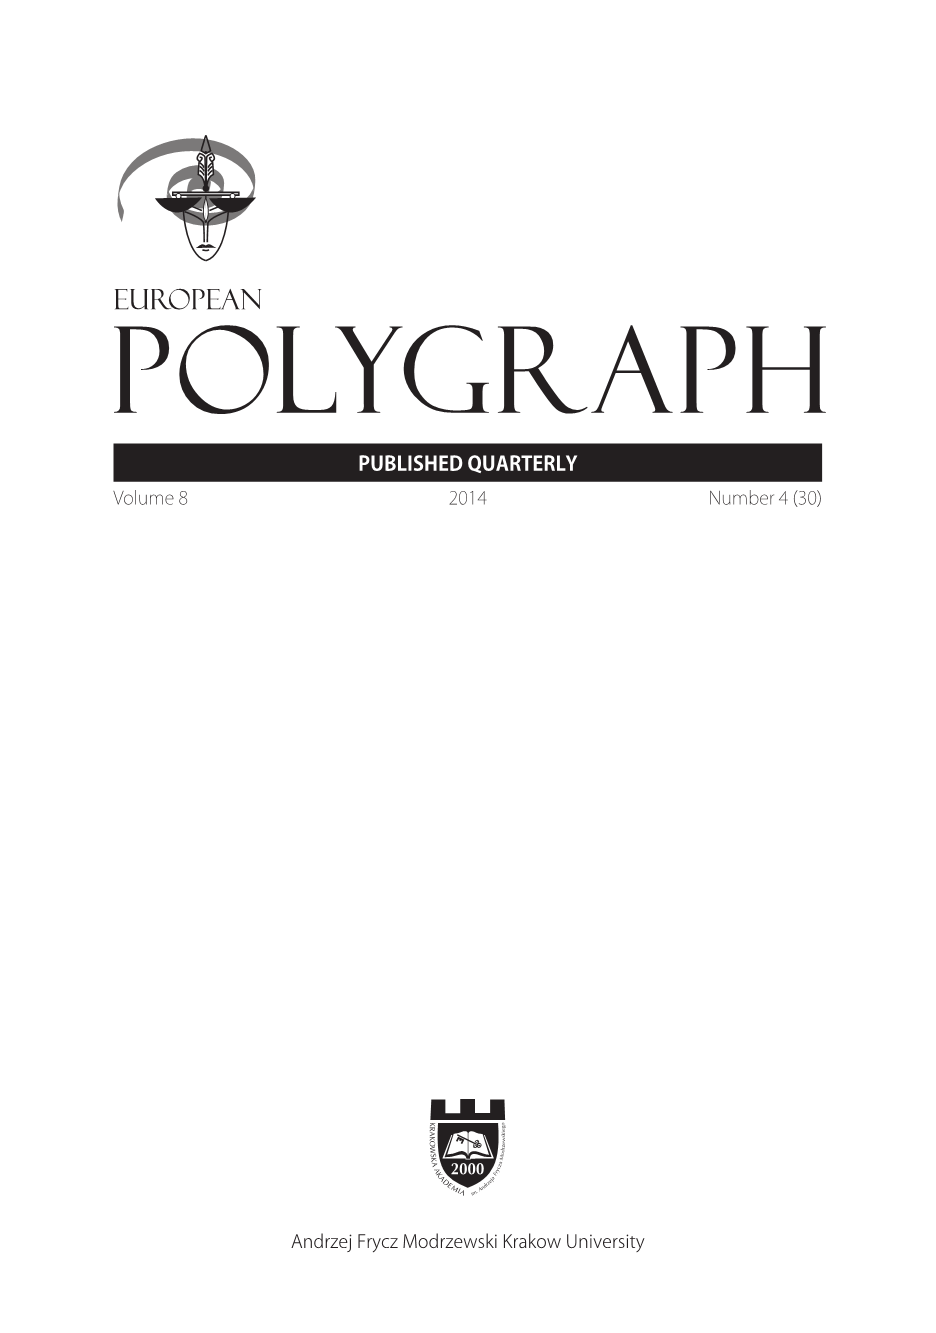 Selected Problems in Evaluation of Polygraph Examination Results Cover Image